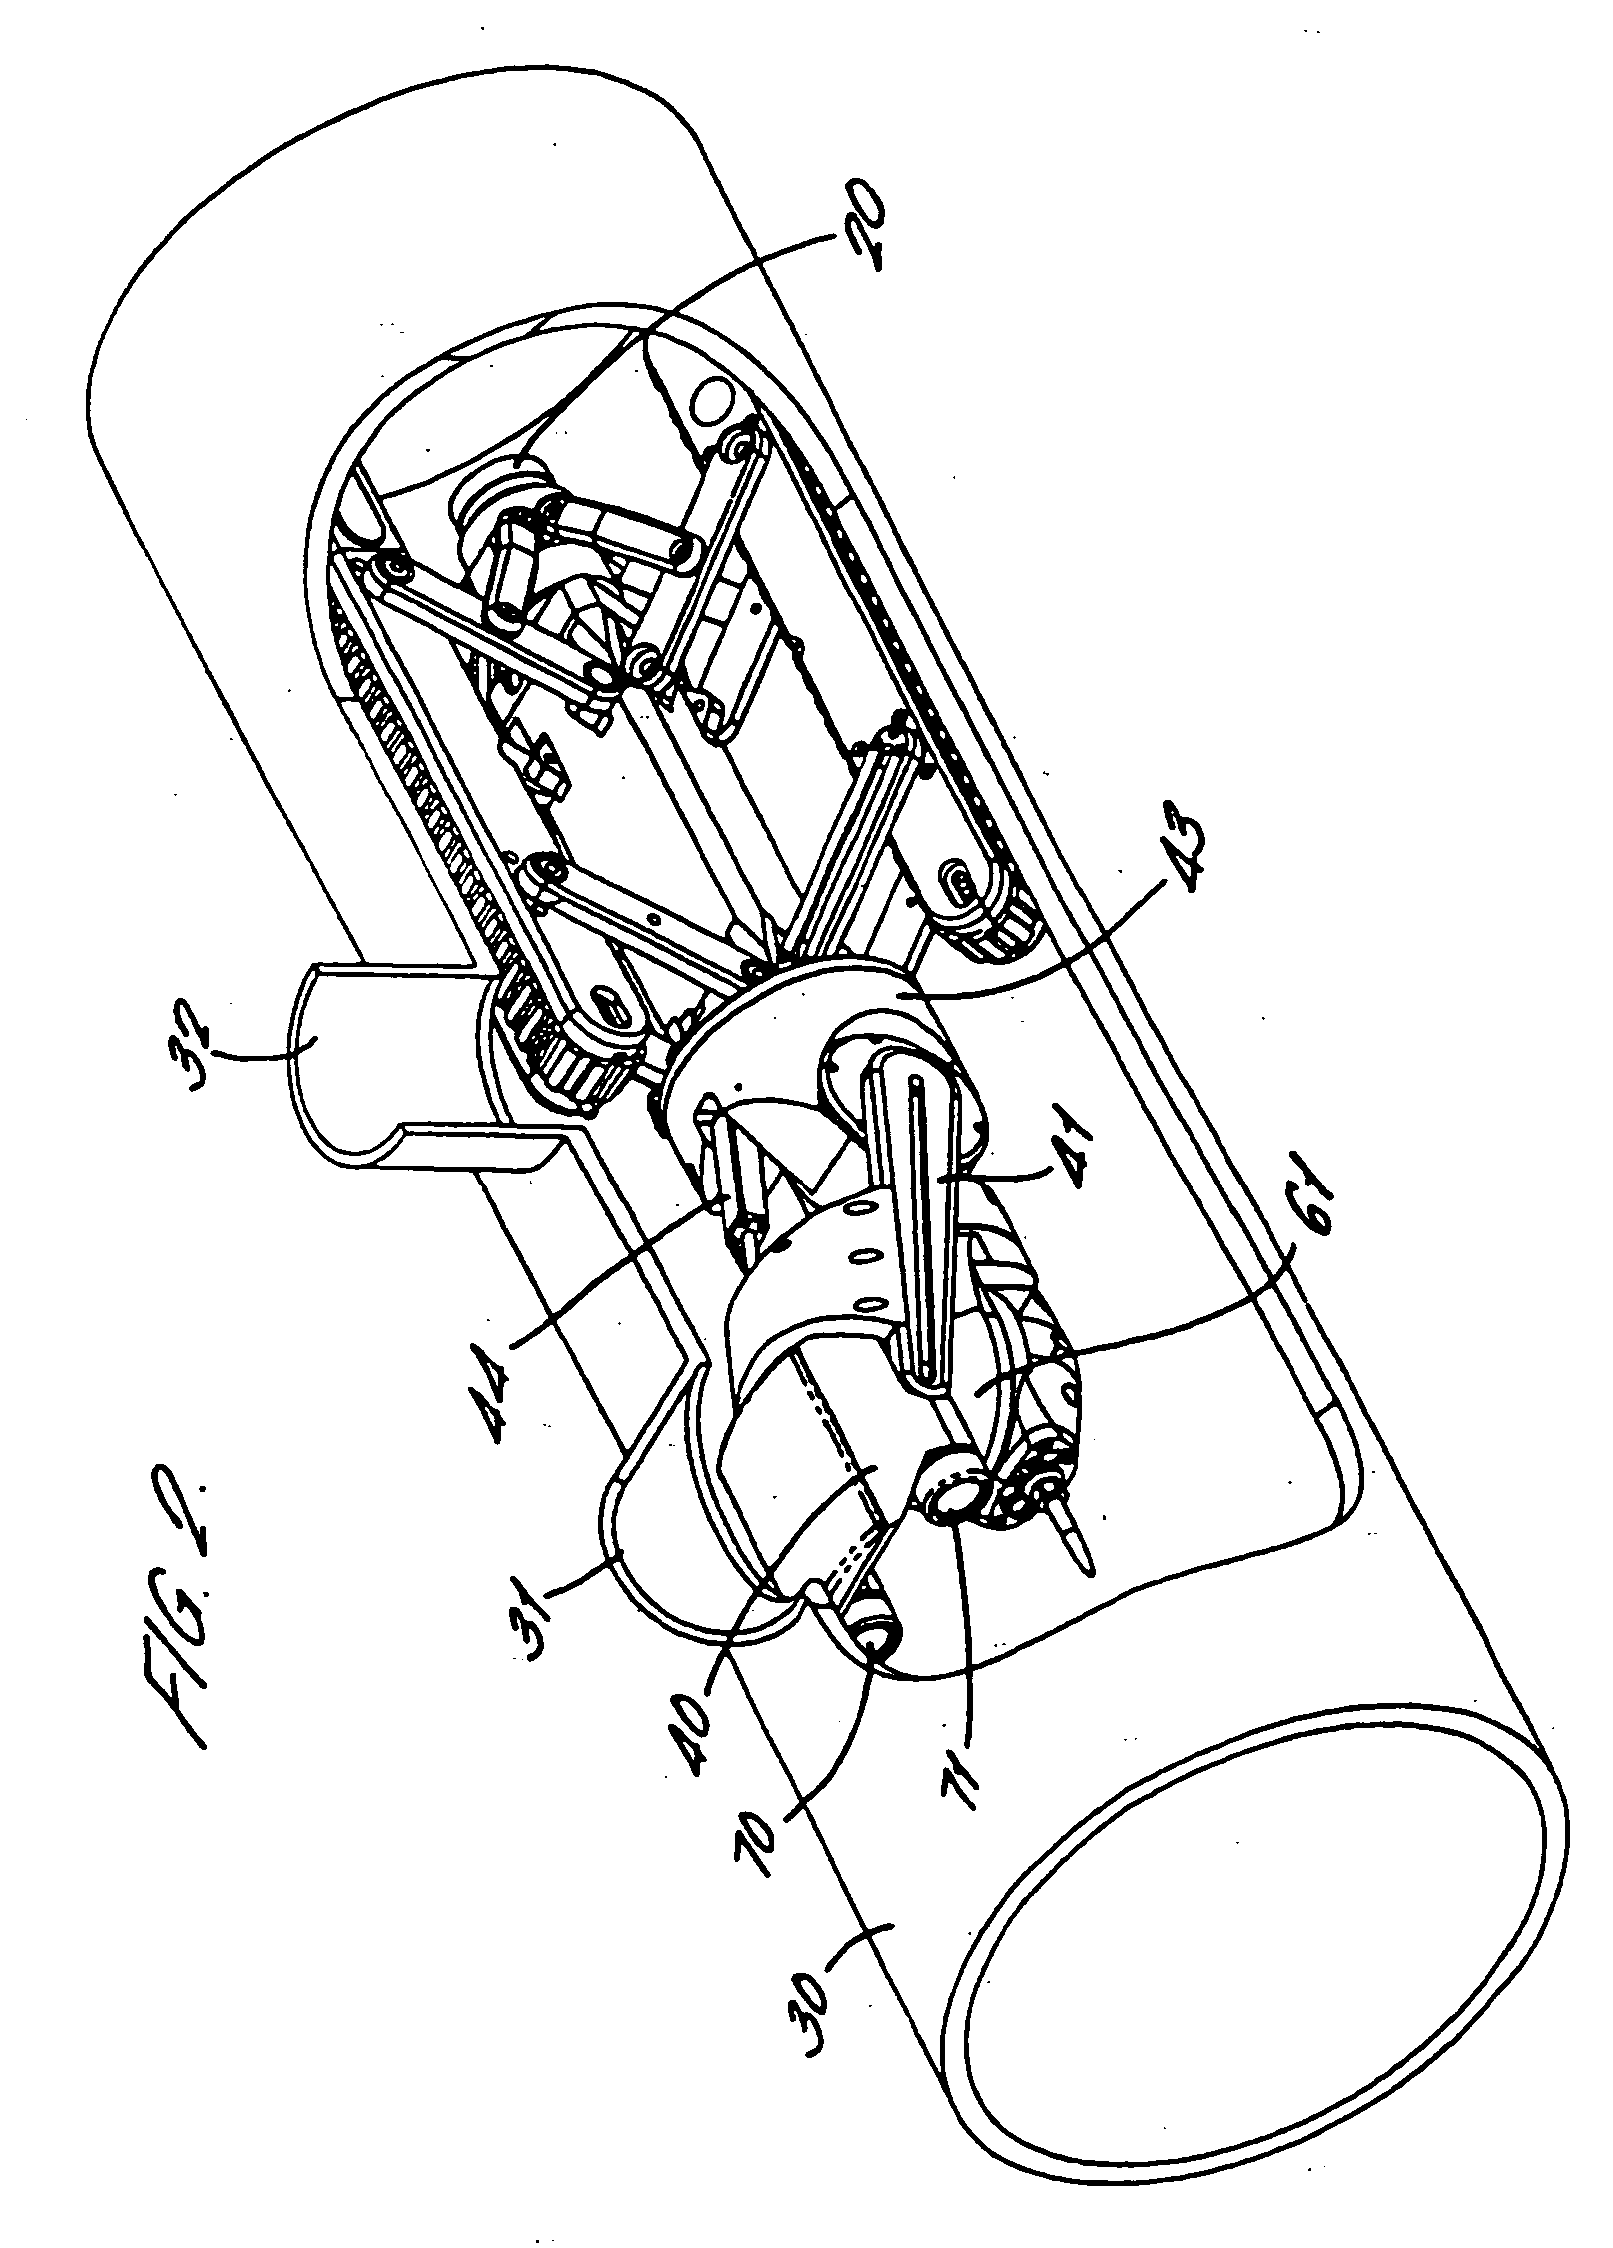 Vehicle for inspecting a pipe